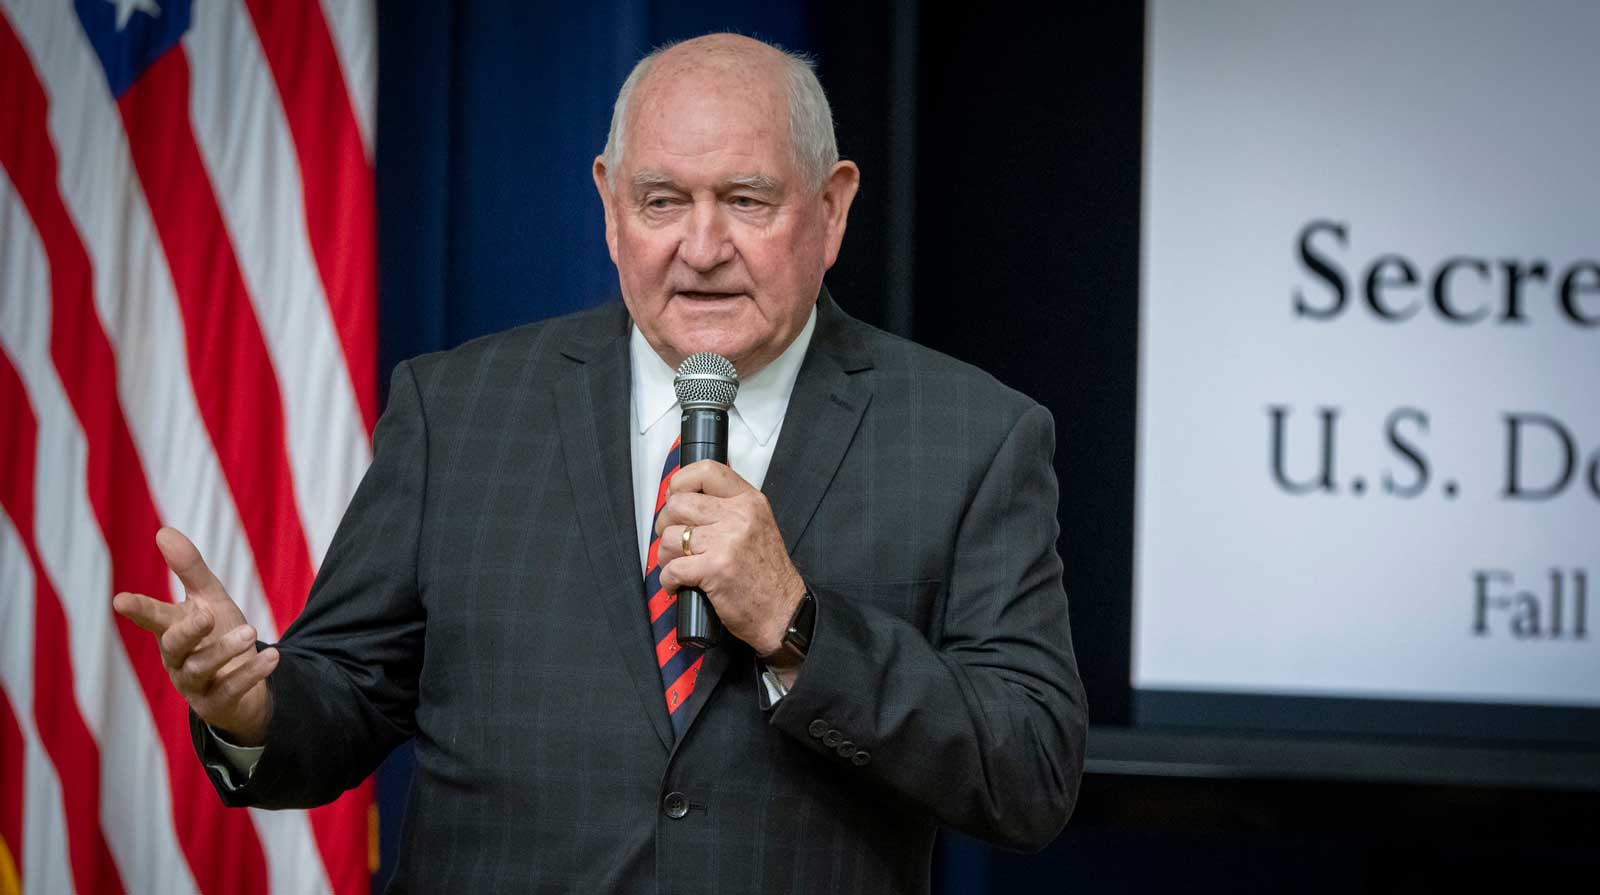 Agriculture Secretary Sonny Perdue. Credit: USDA, Tom Witham